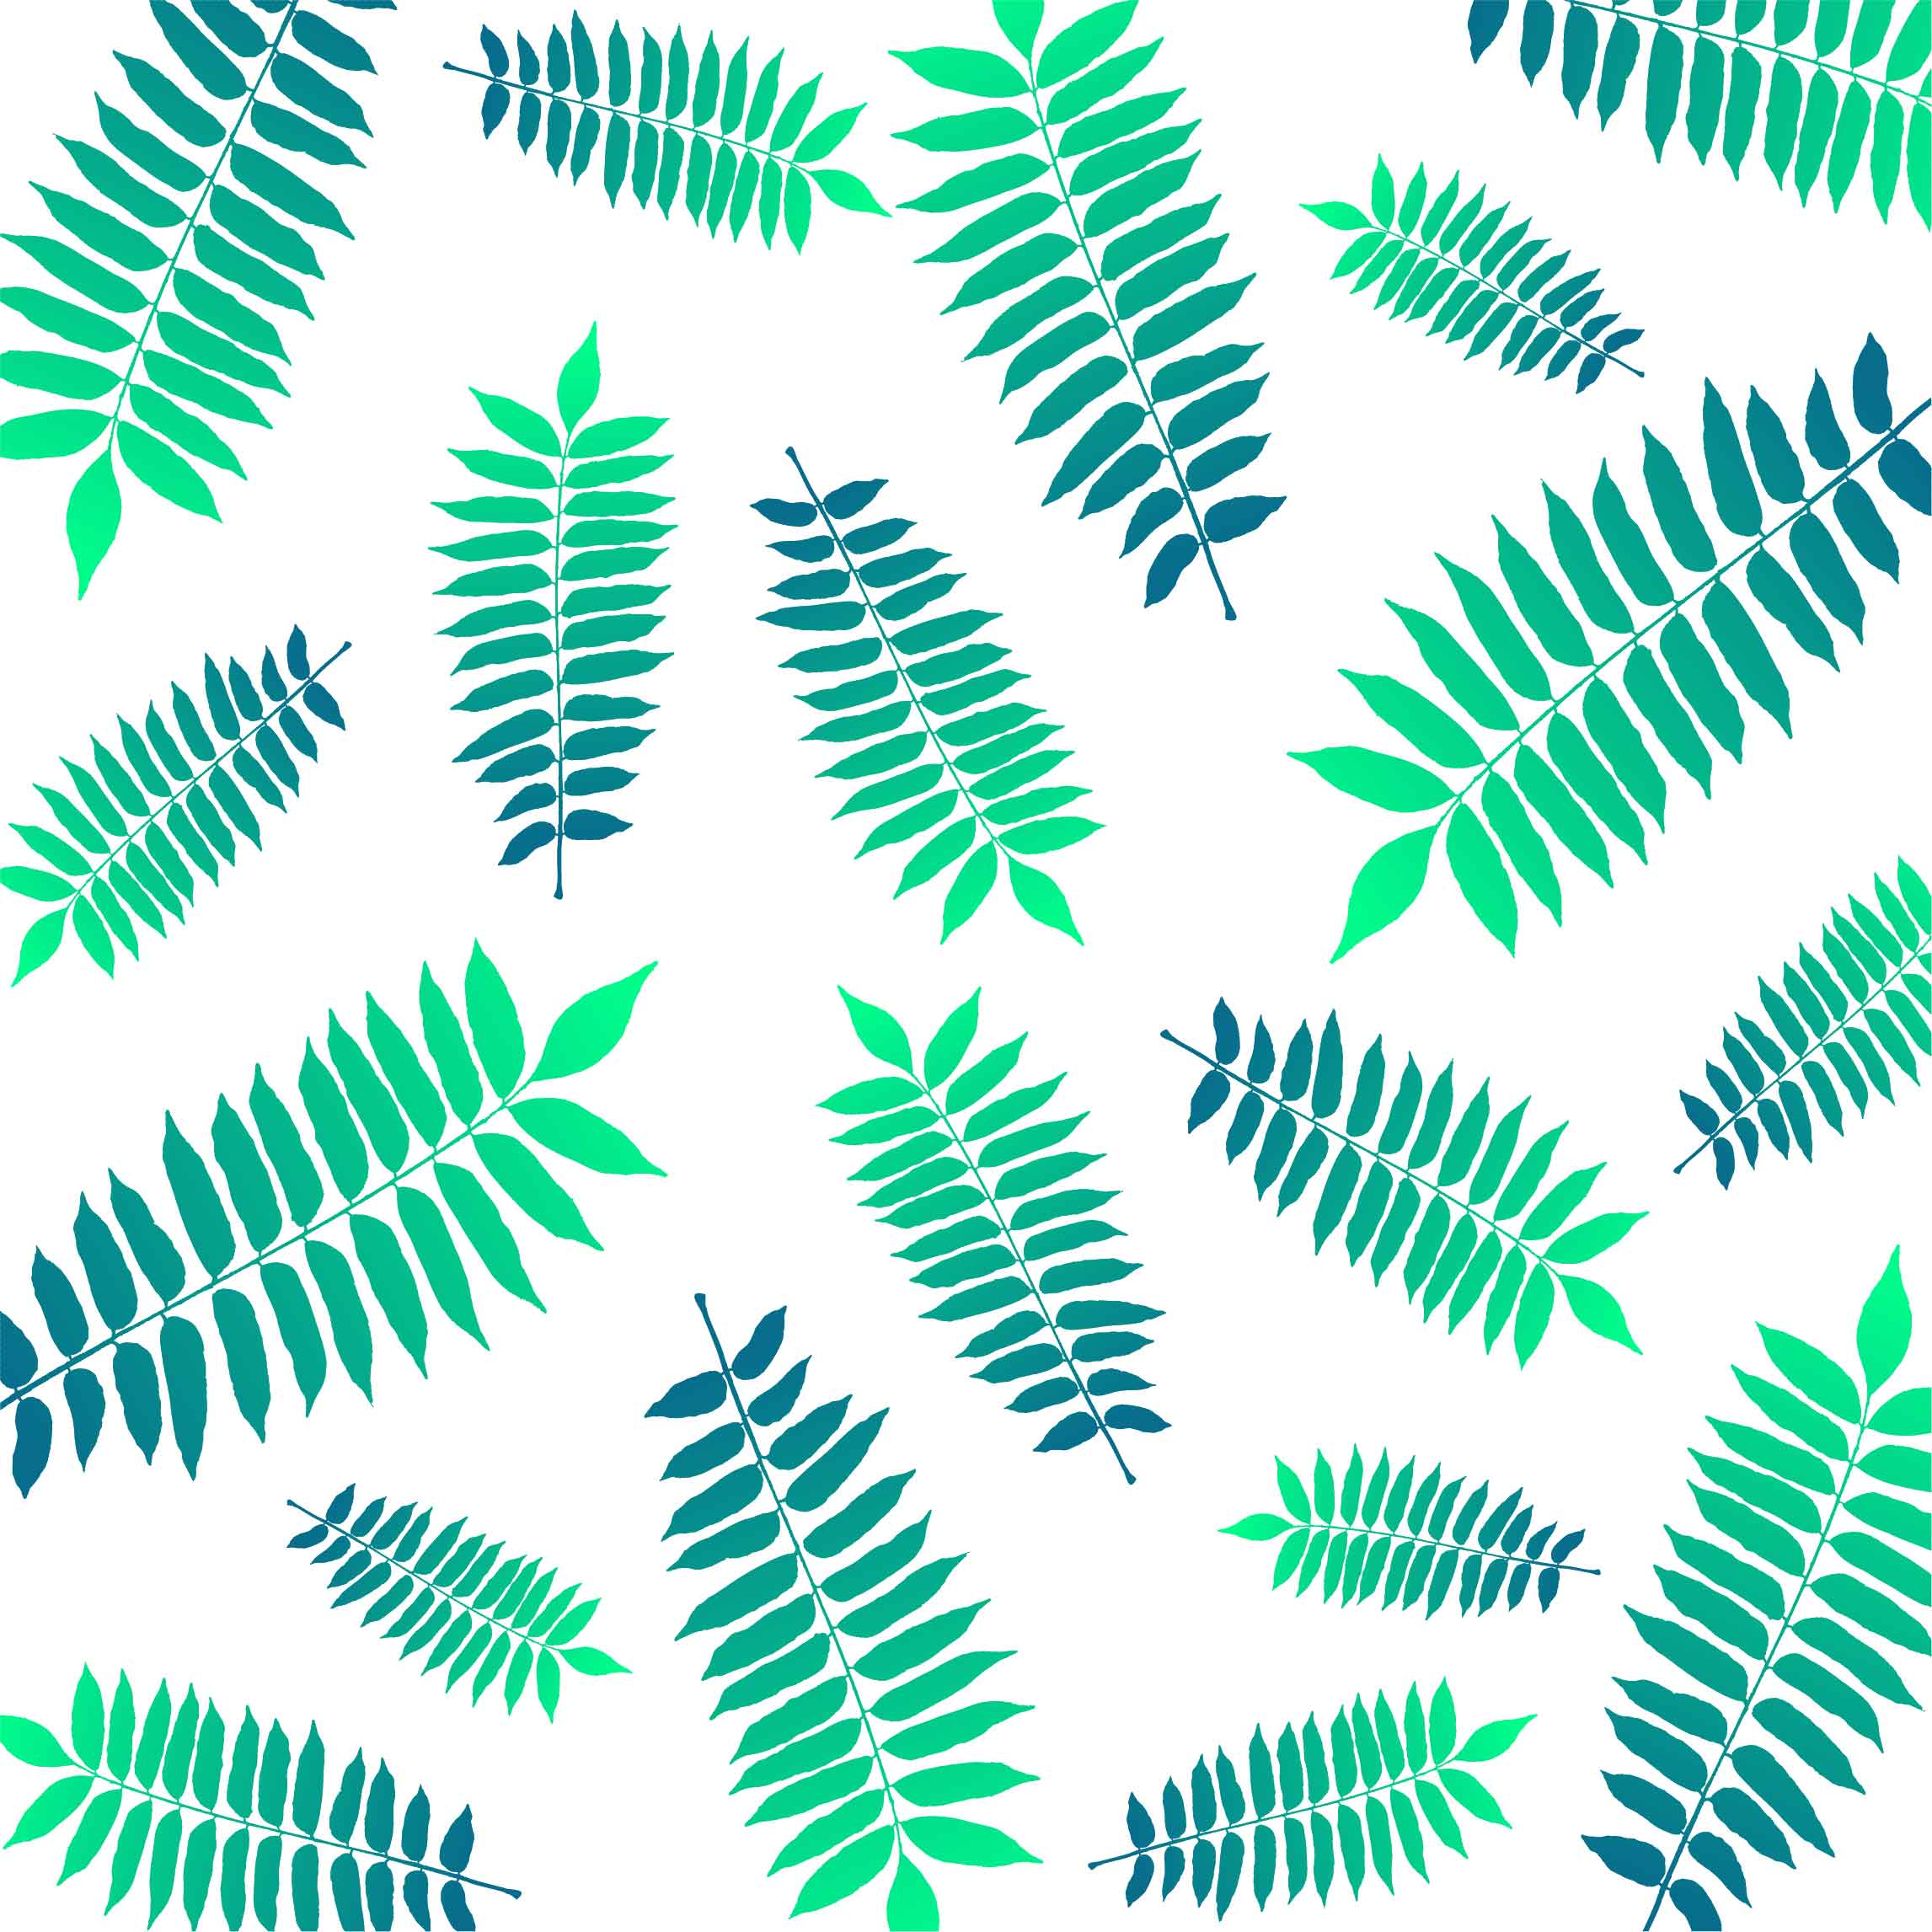 Sunti leaf background preview image.